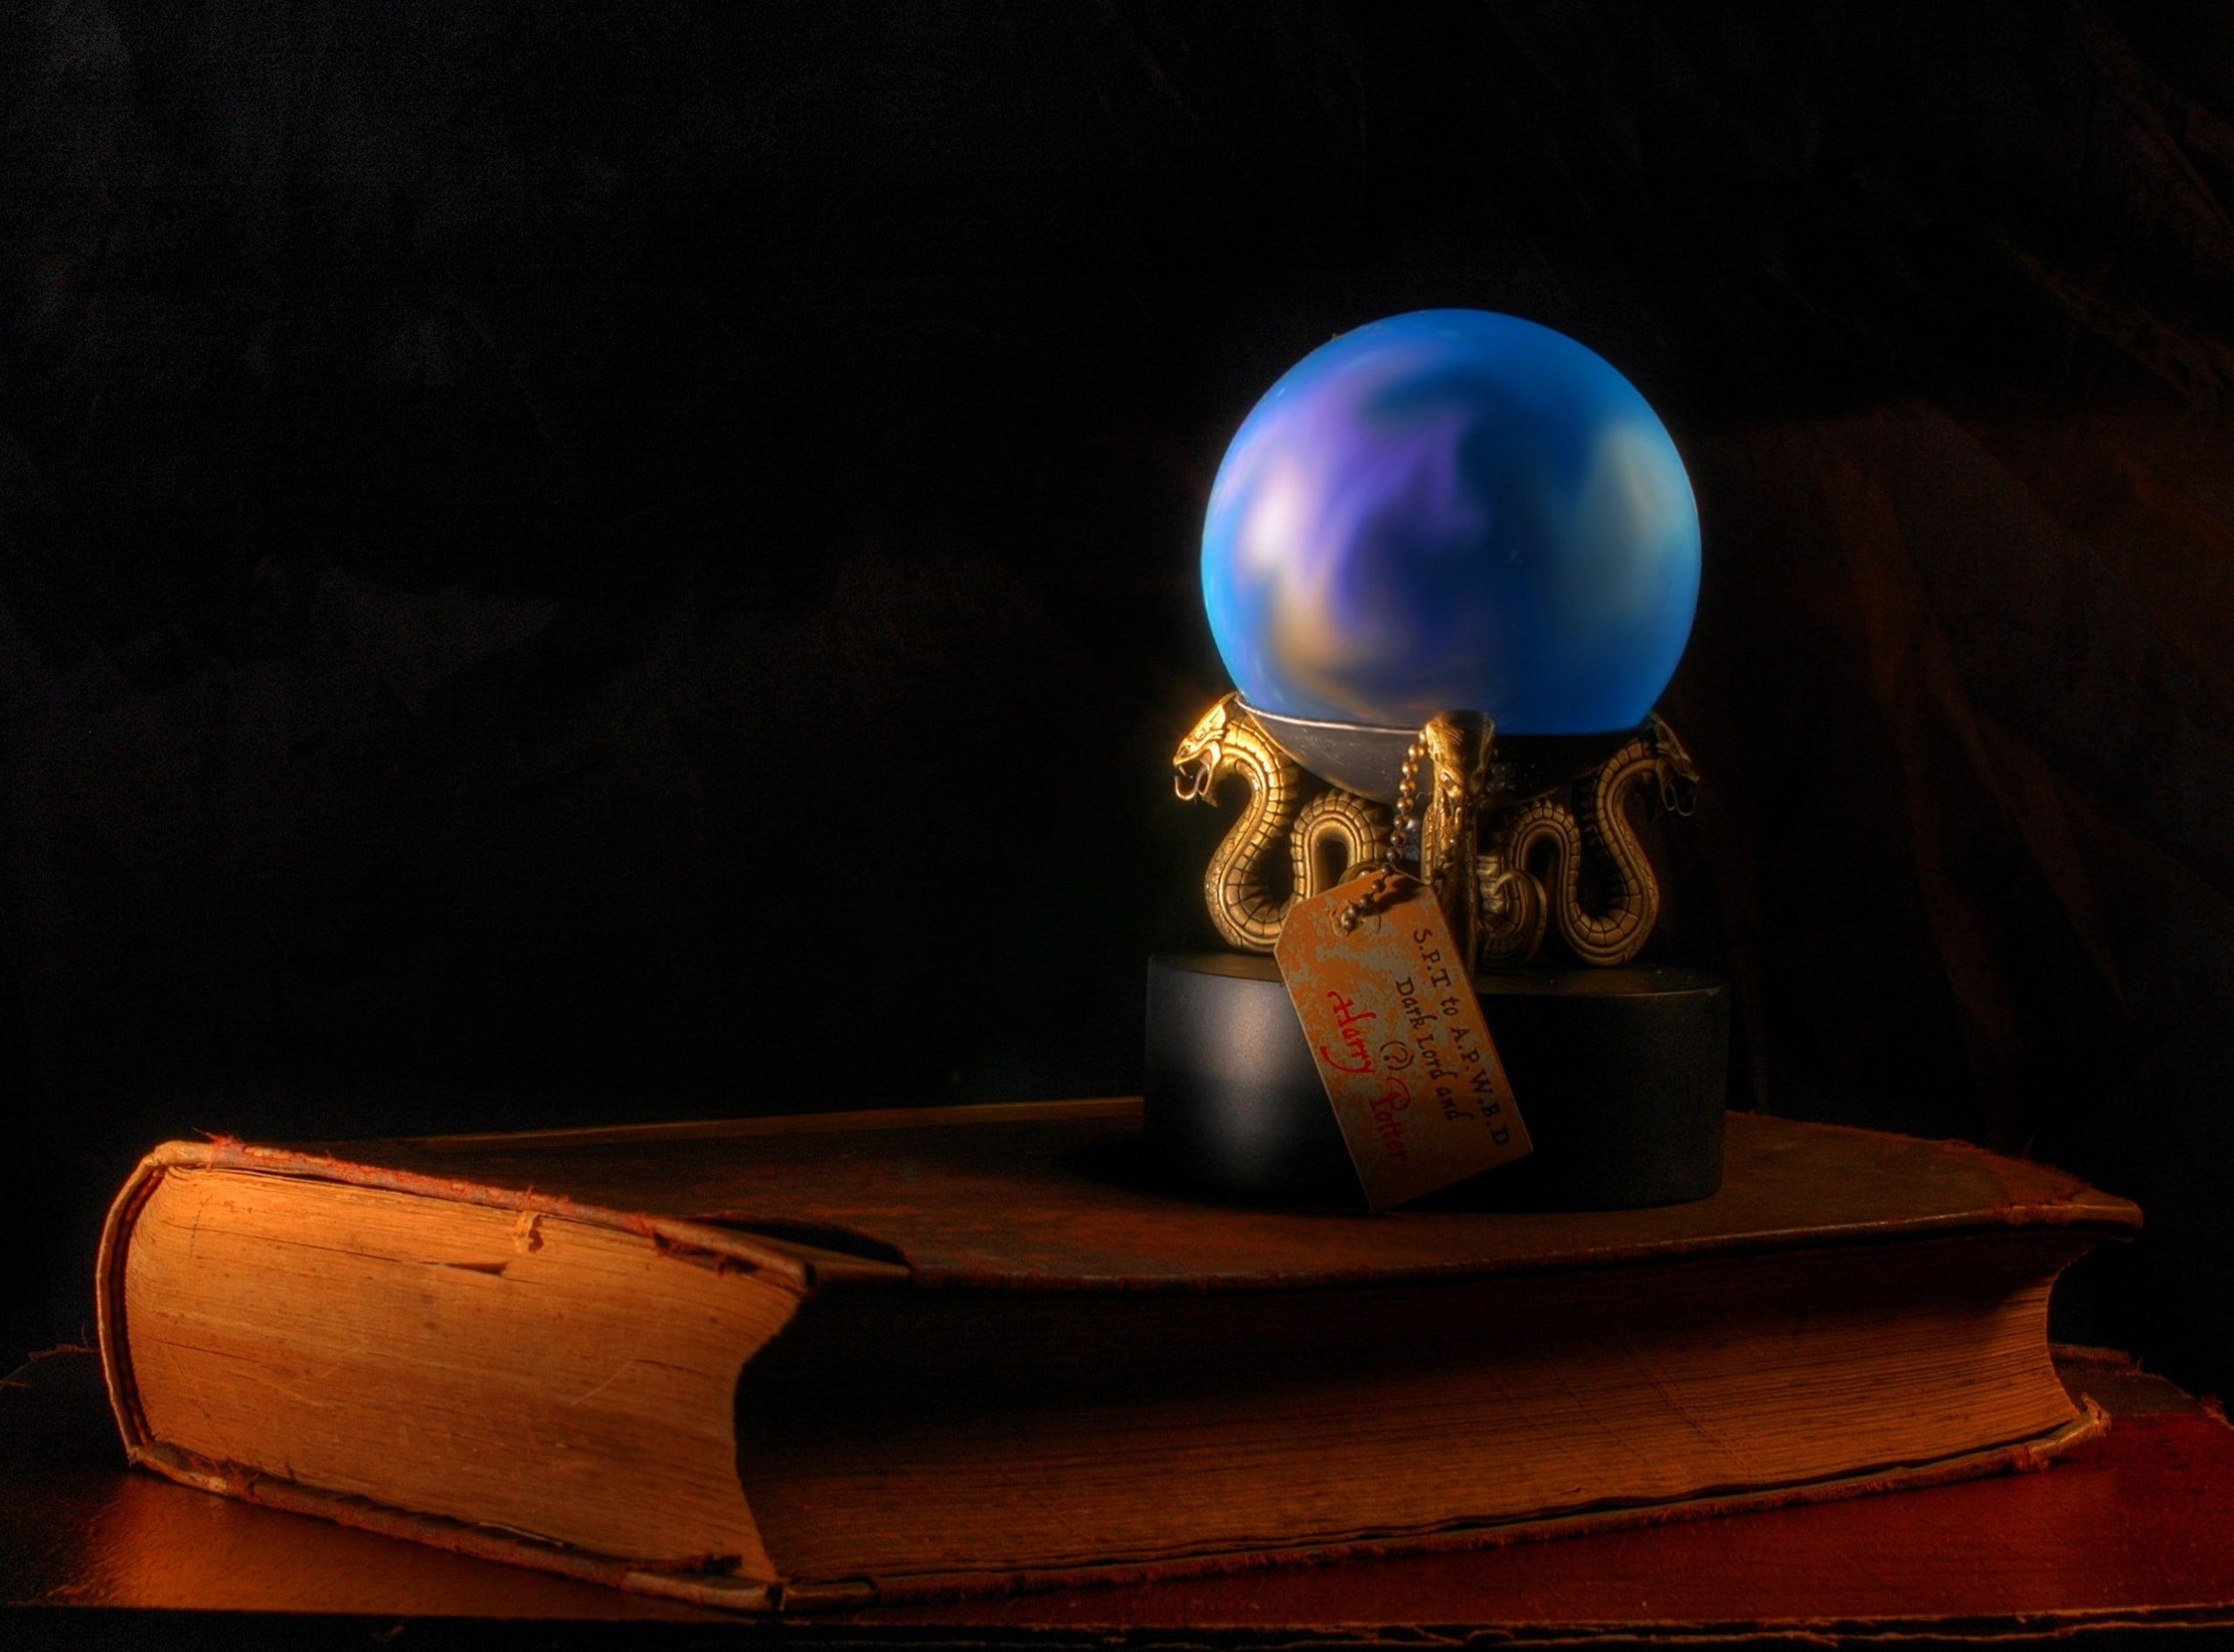 The Prophecy, blue glass ball, Vintage, Magic, Book, wood - material